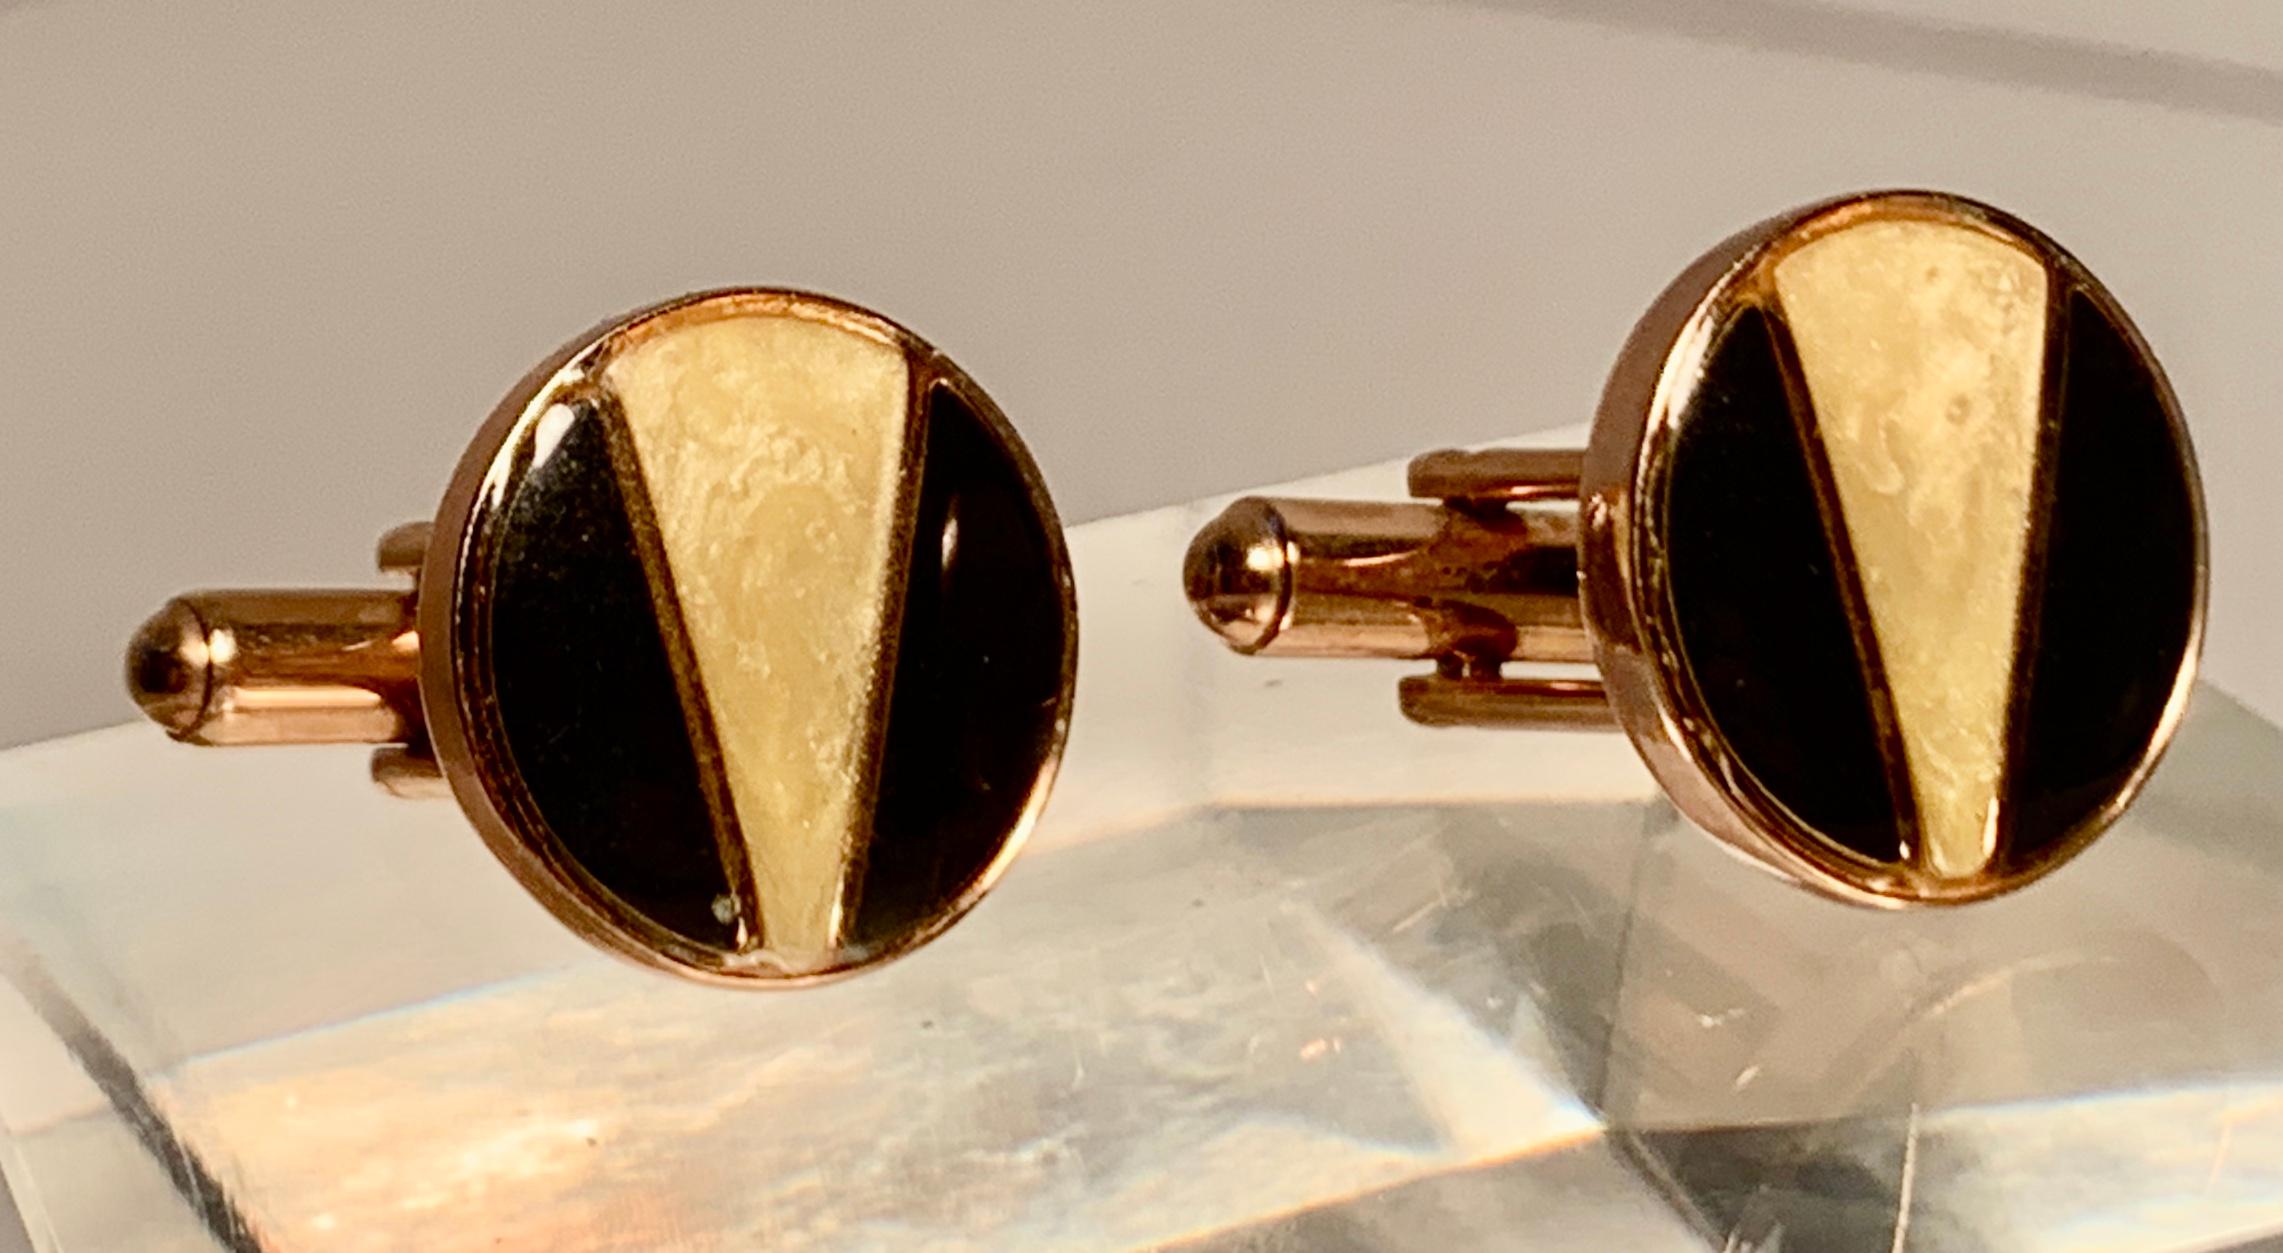 Women's or Men's Art Deco Style Vintage Cufflinks in a Yellow Gold Filled Setting